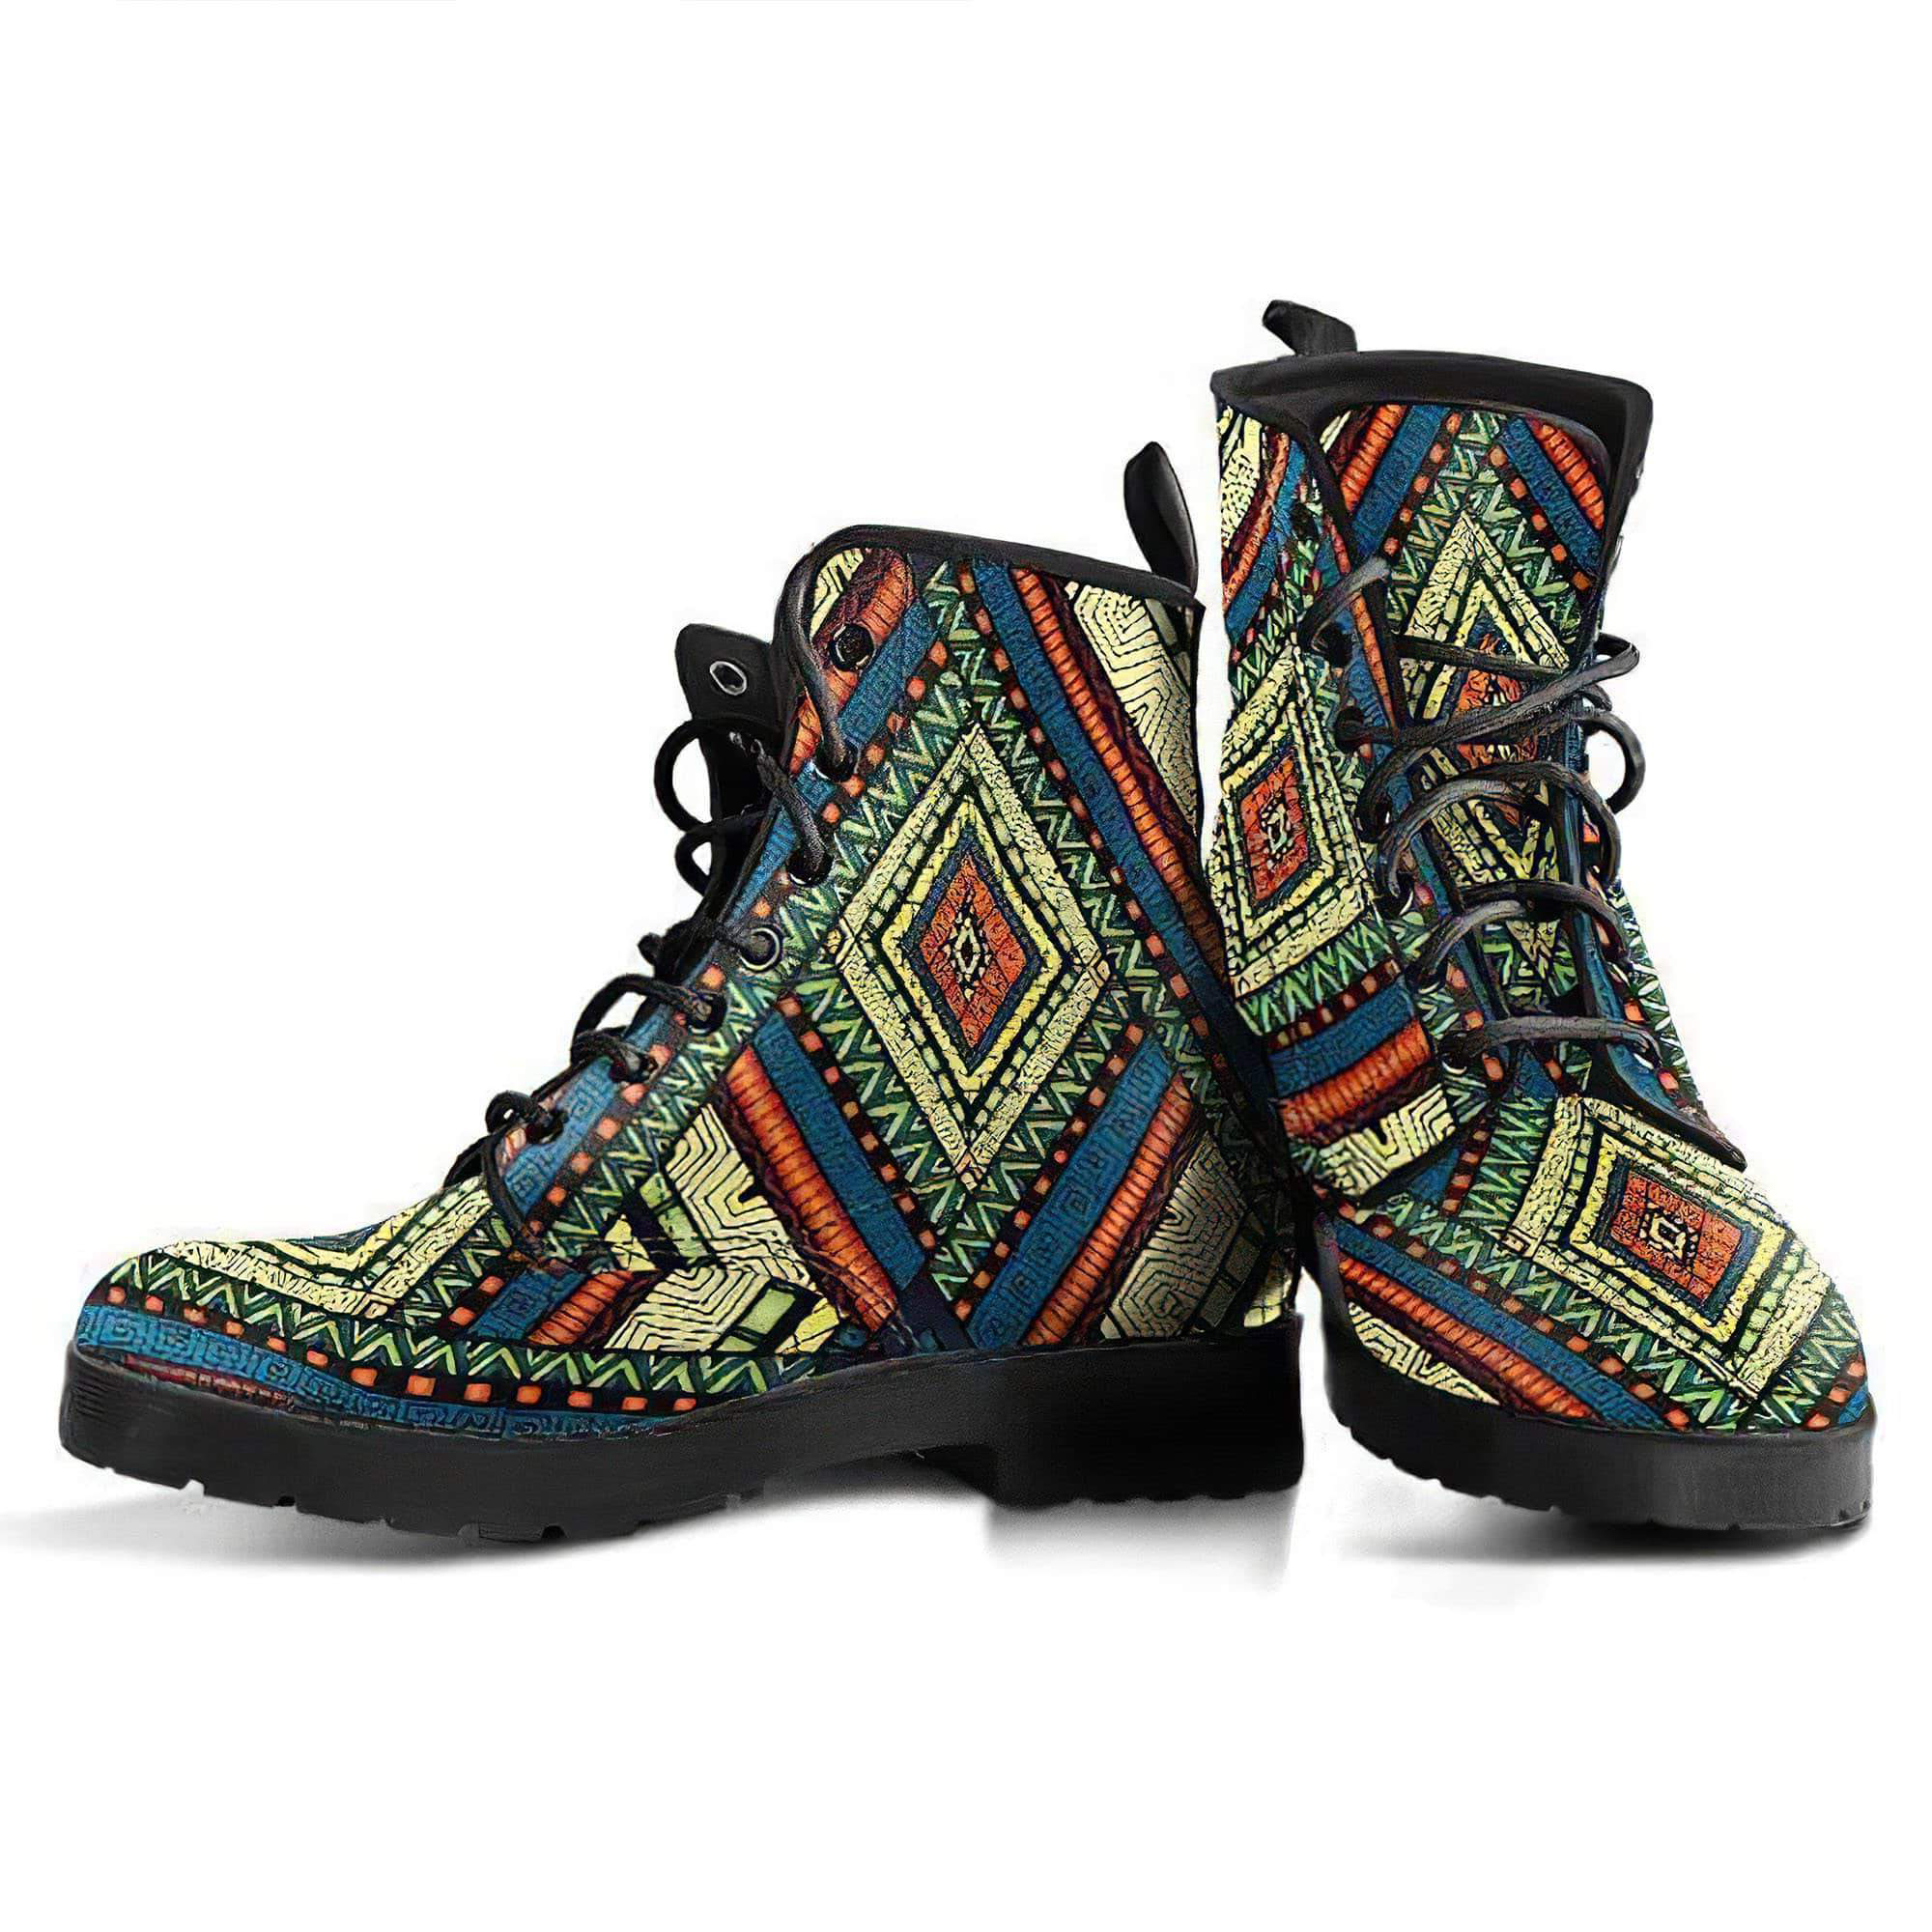 vintage-tribal-handcrafted-boots-women-s-leather-boots-12051973177405.jpg